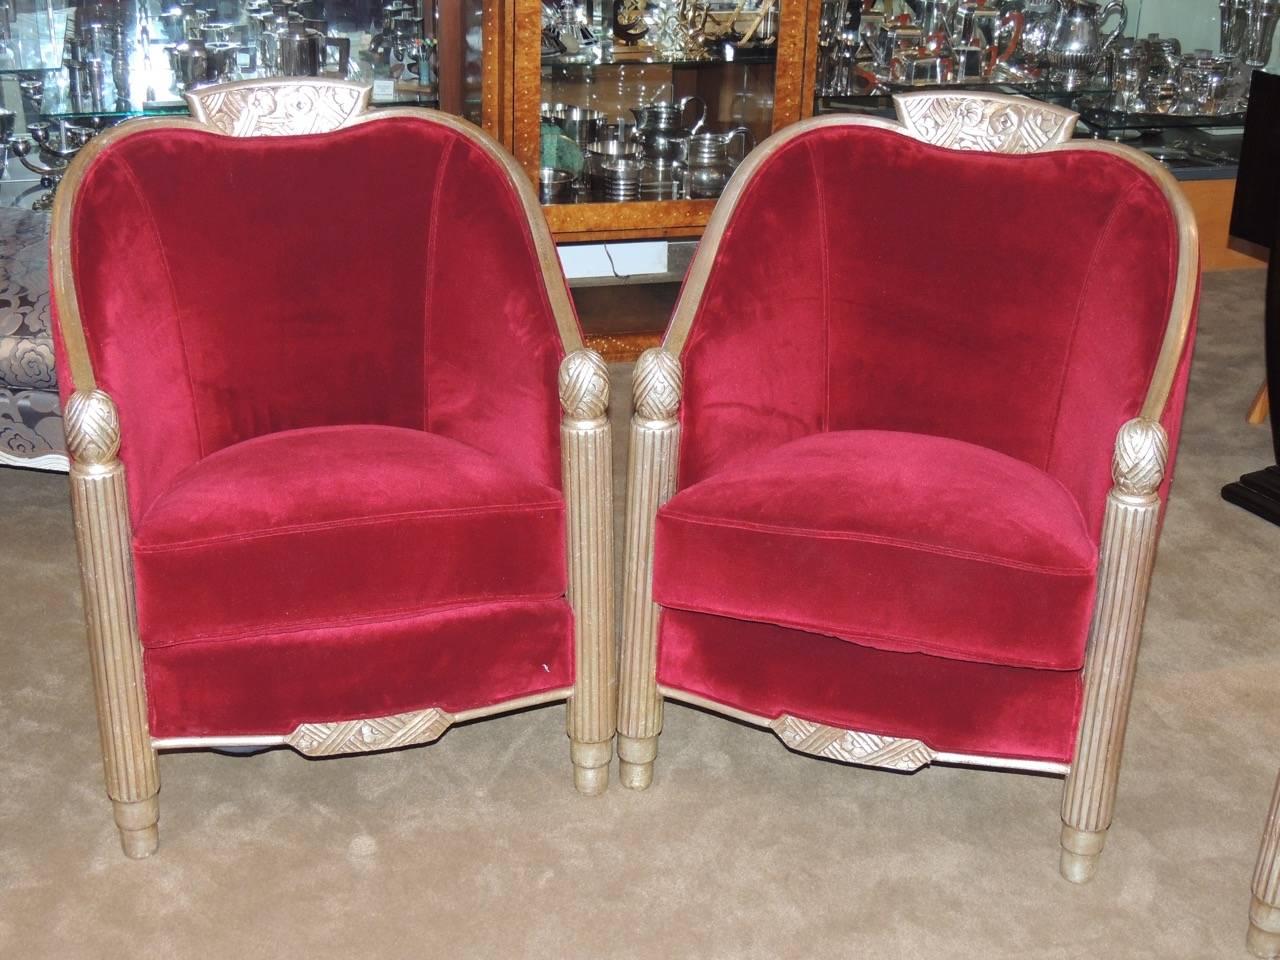 We present an elegant, spectacular and complete seating suite by one of the most important designers of the Art Deco period- Paul Follot. Included are a charming settee with gilded wood and decorative carved panels, two matching chairs in the